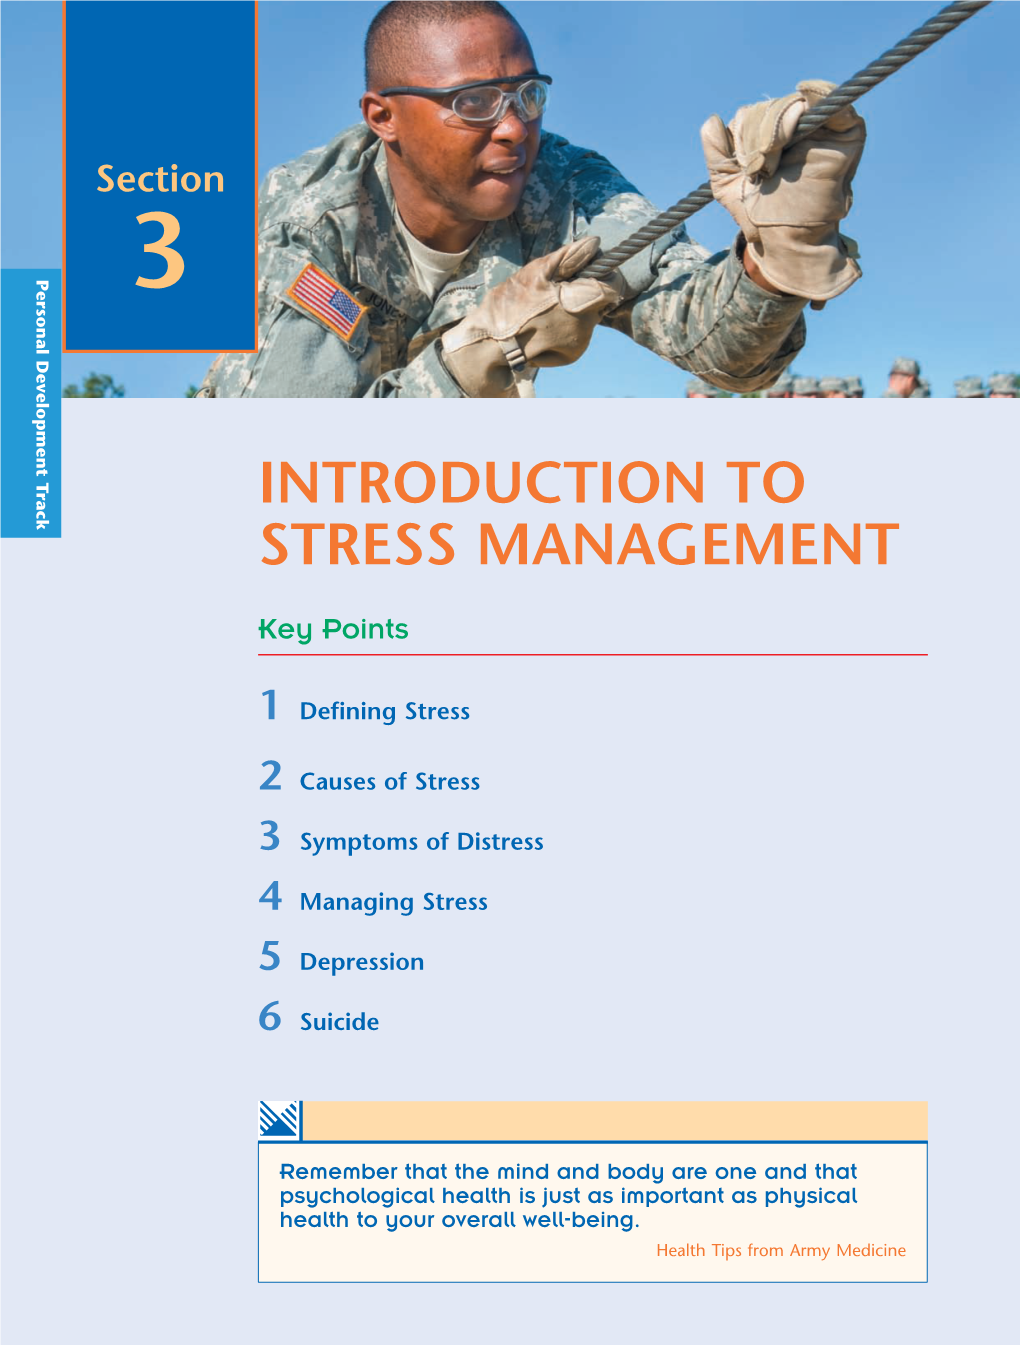 Introduction to Stress Management